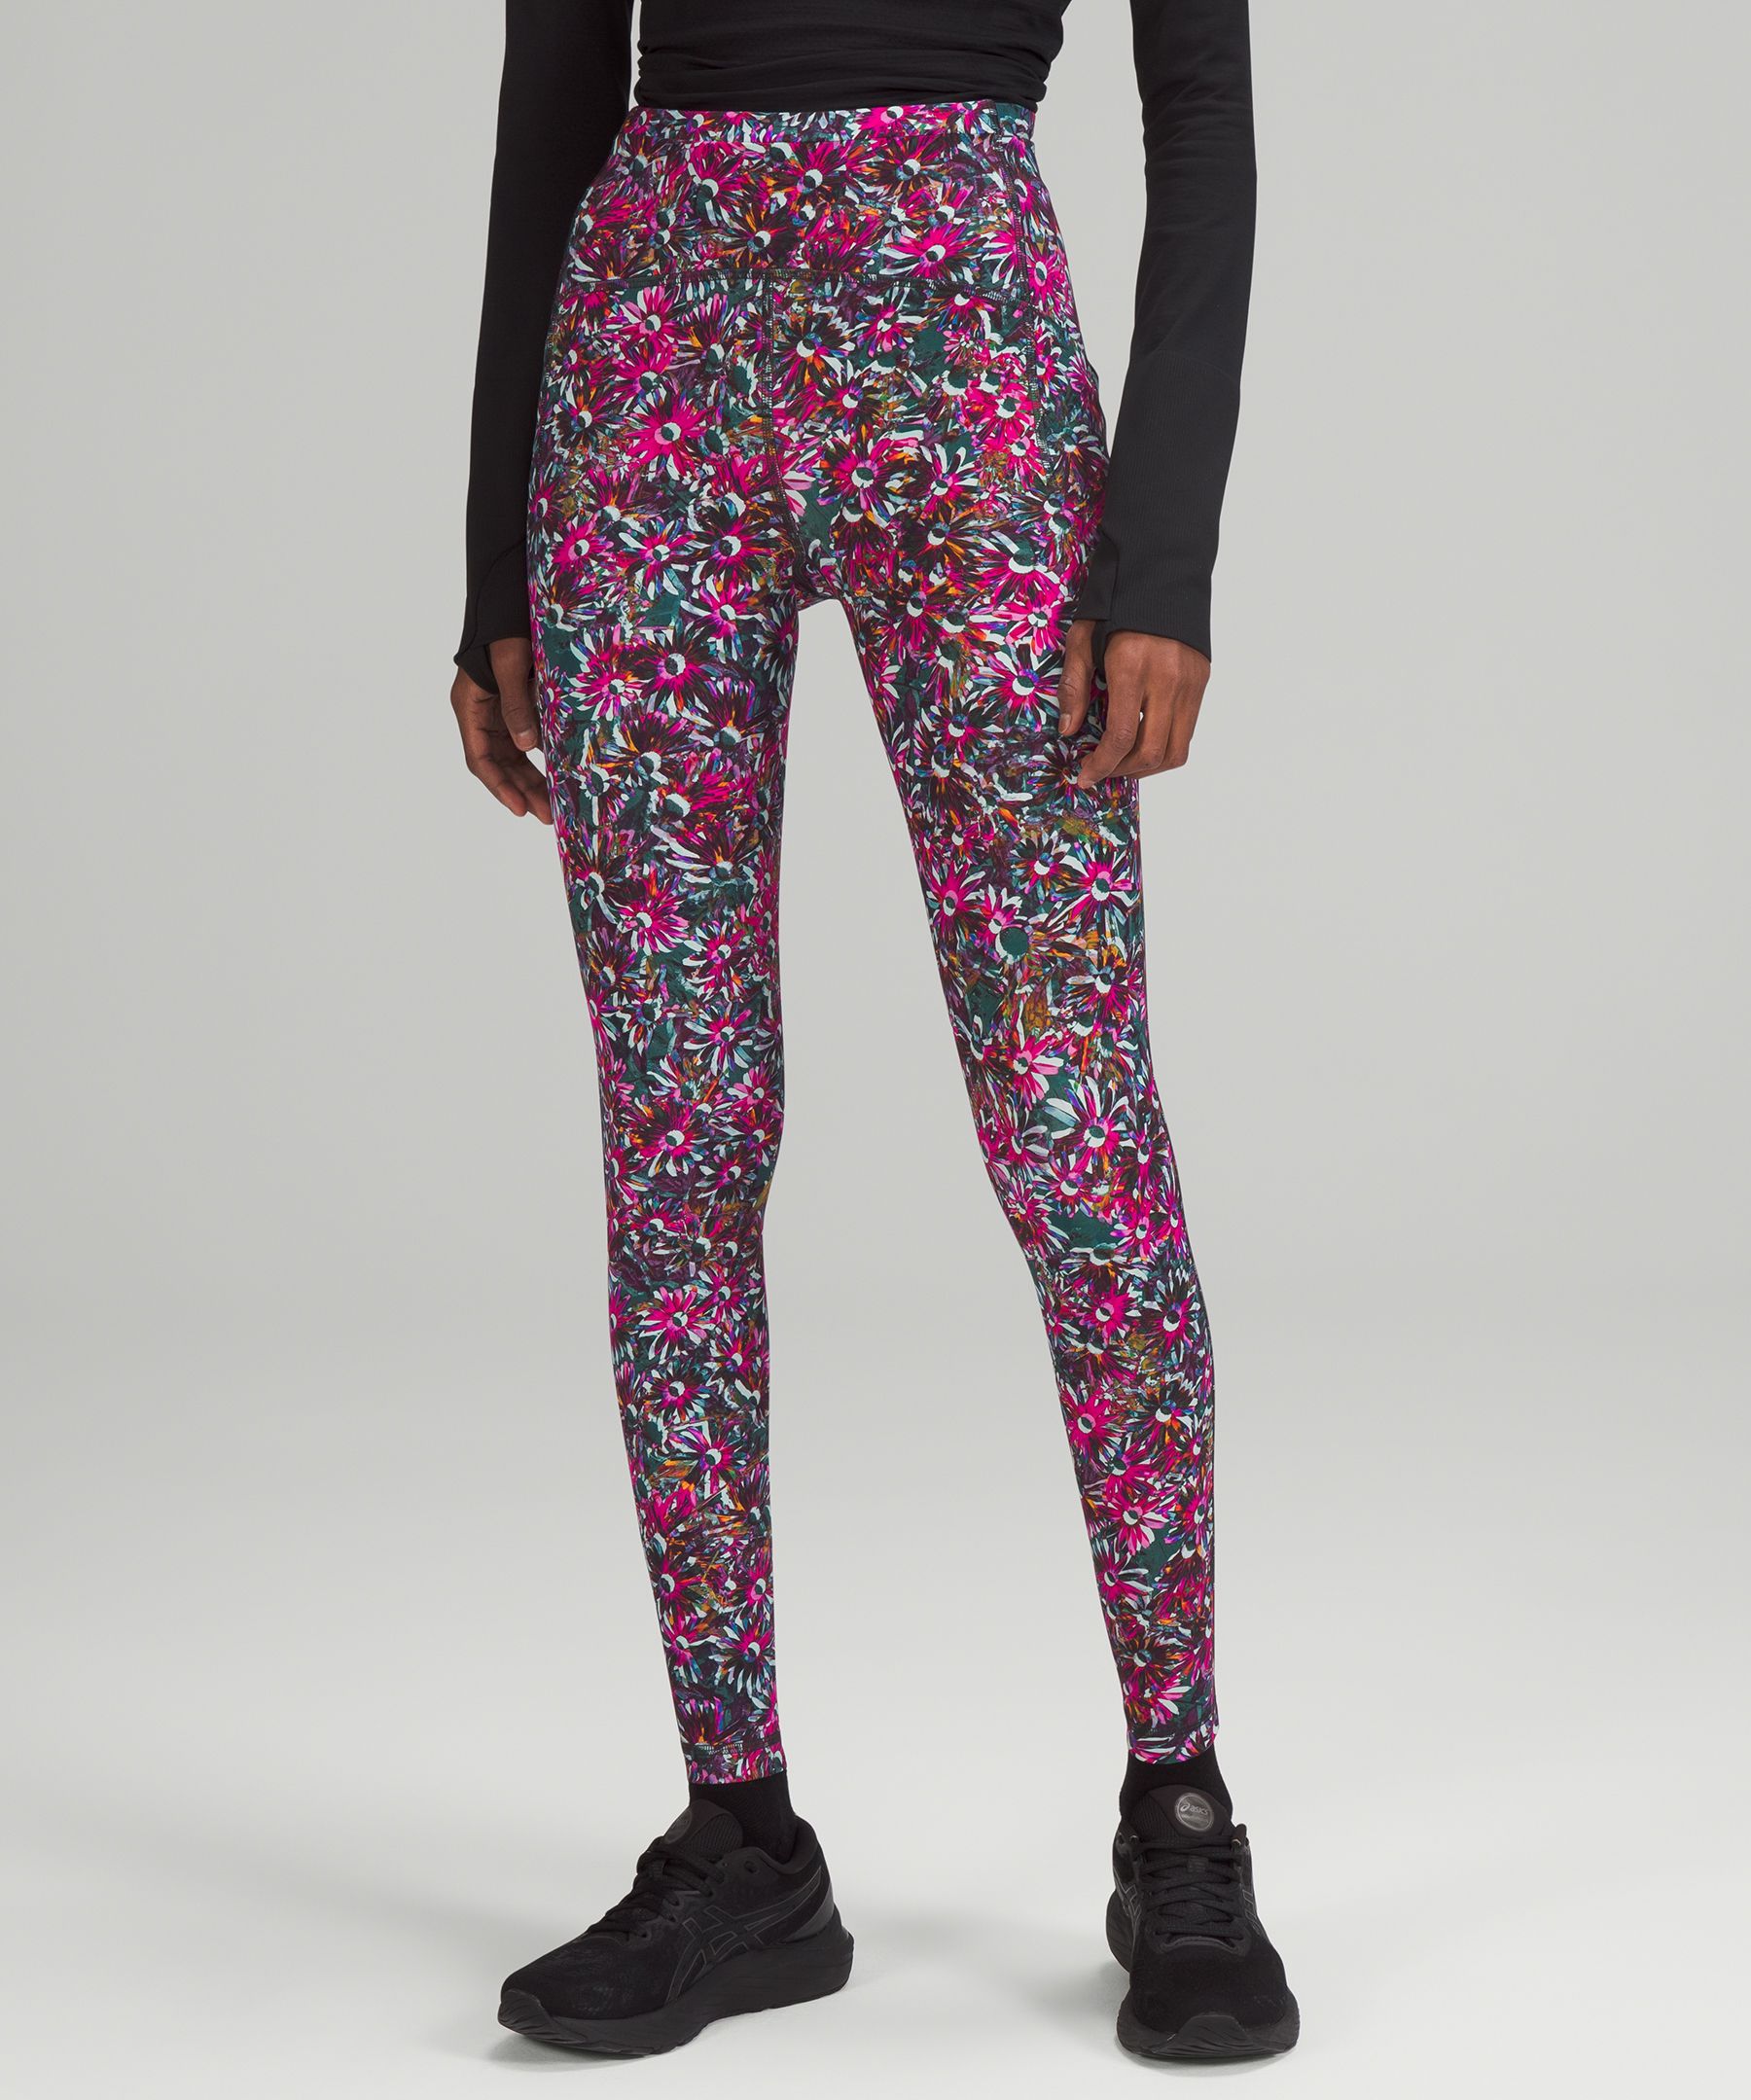 Lululemon Swift Speed High-rise Leggings 28" In Floral Electric